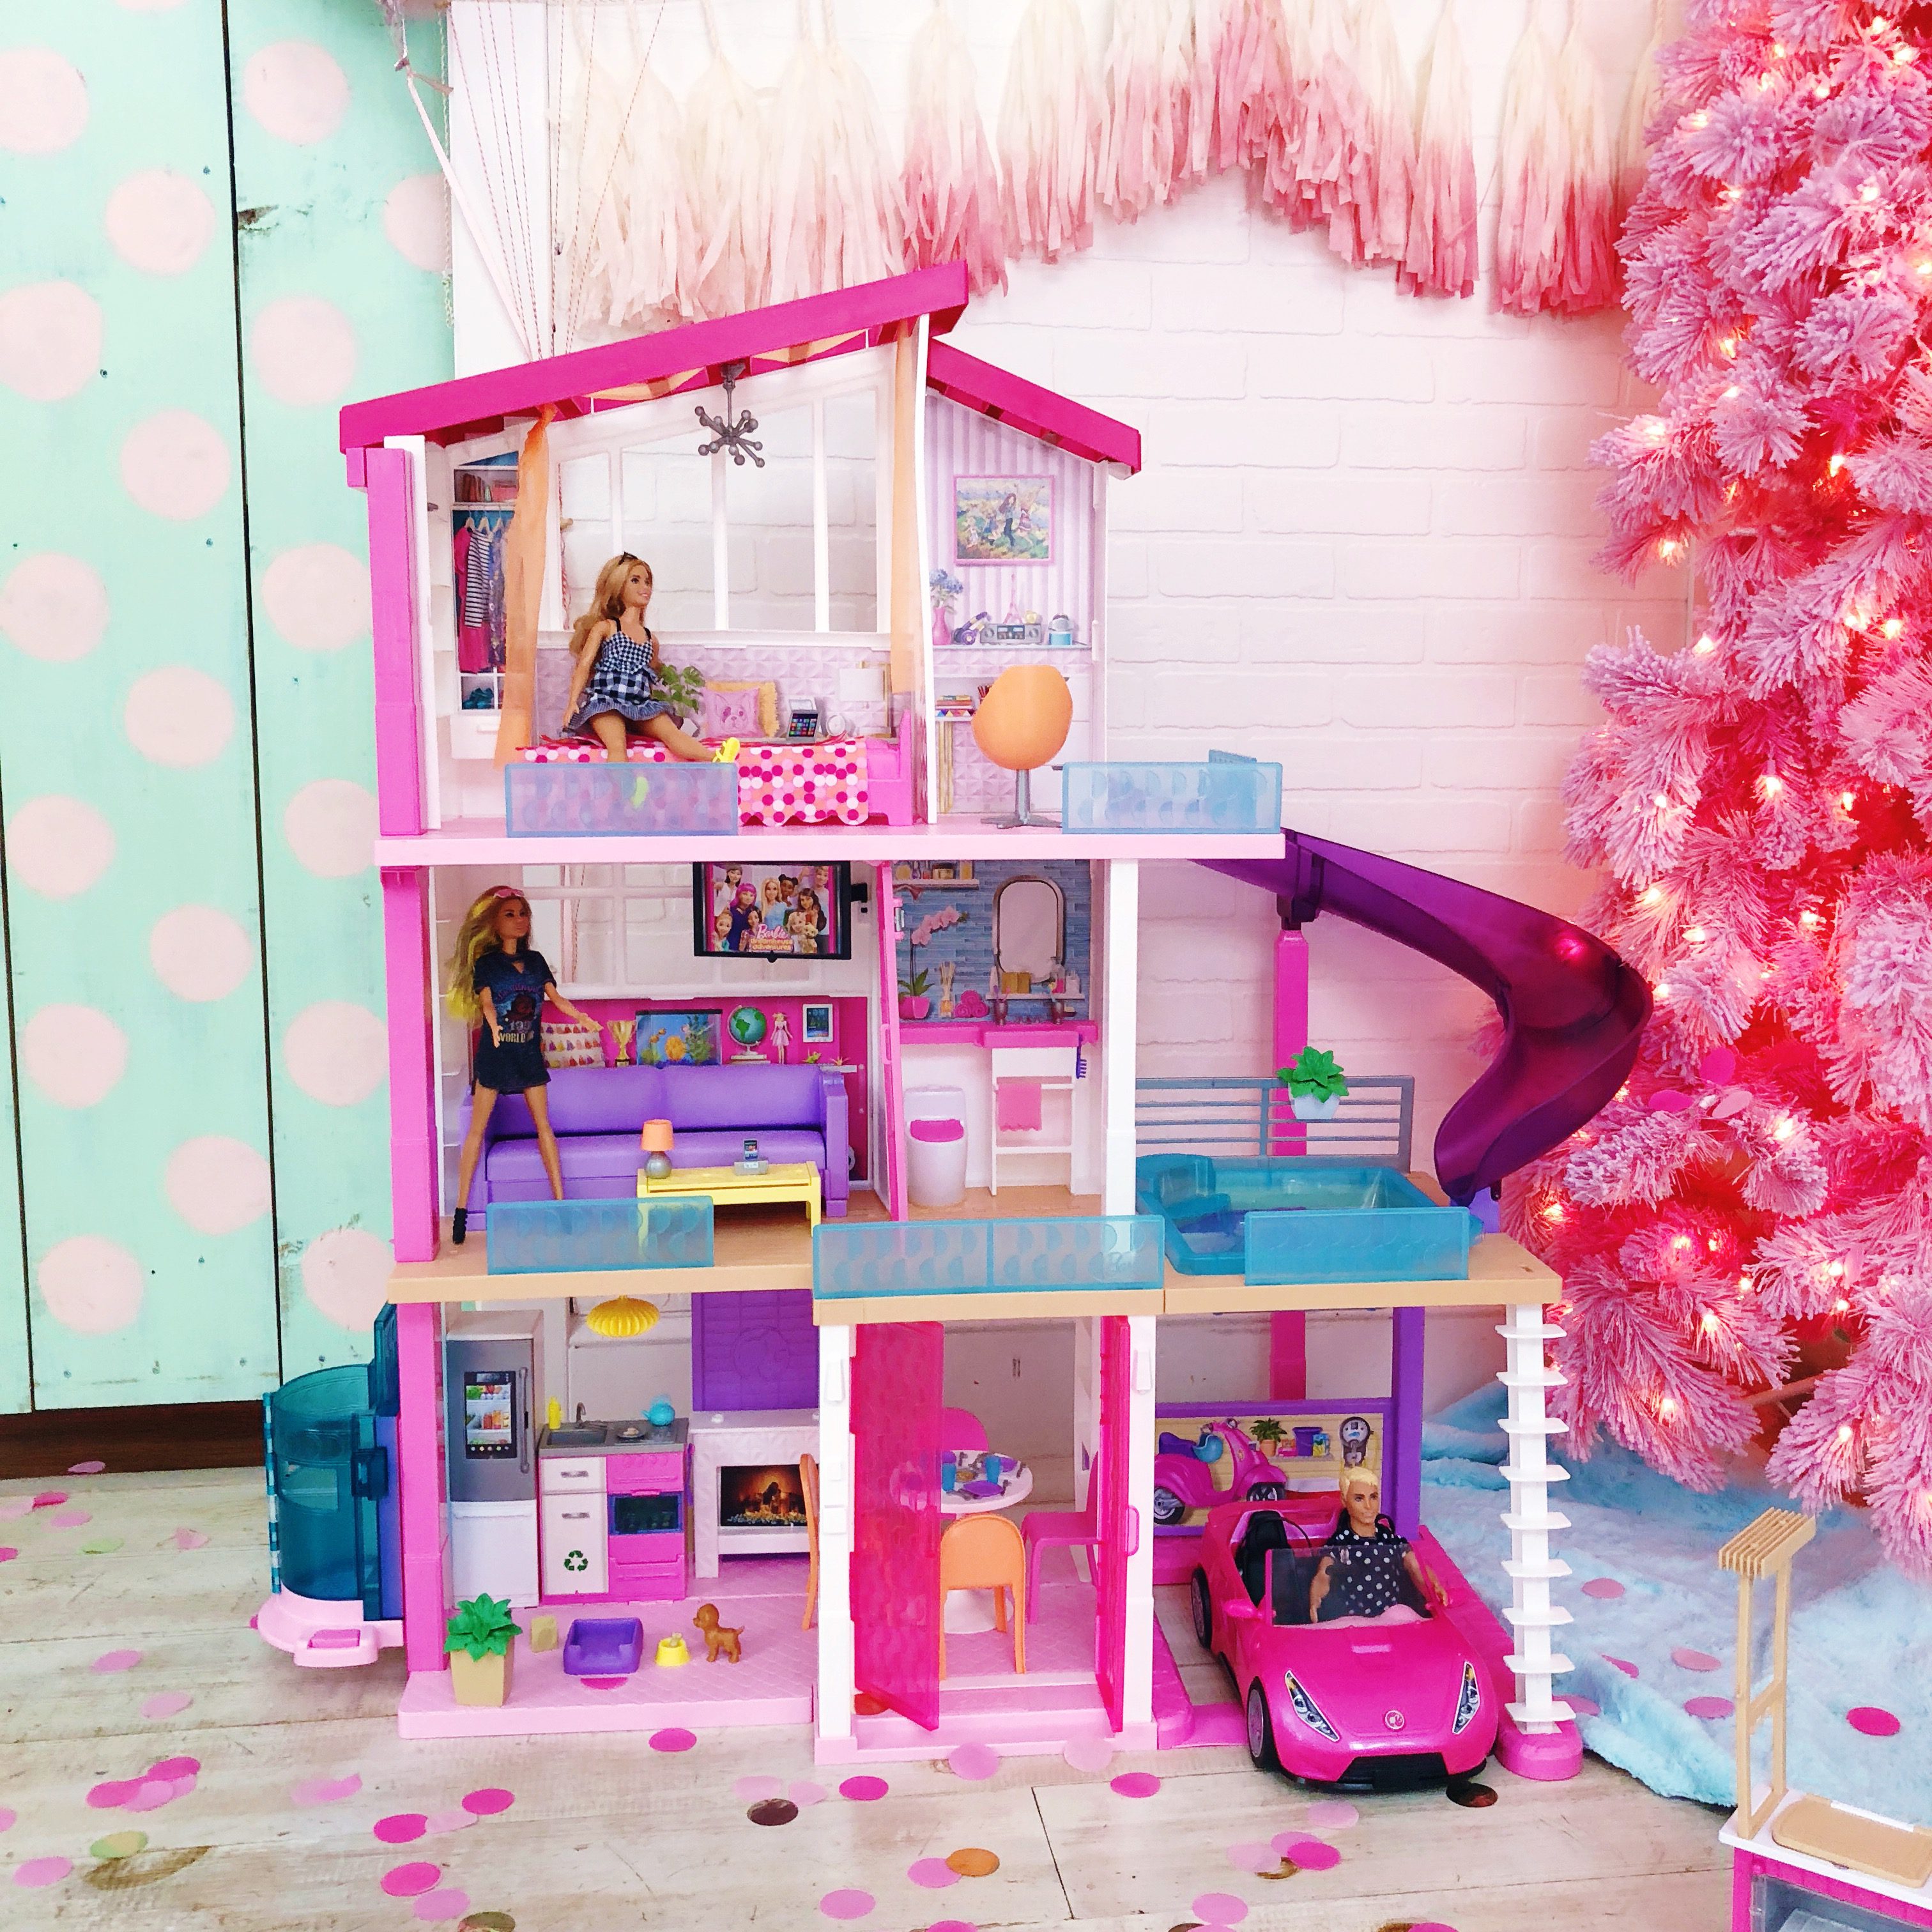 i want to watch barbie in the dreamhouse